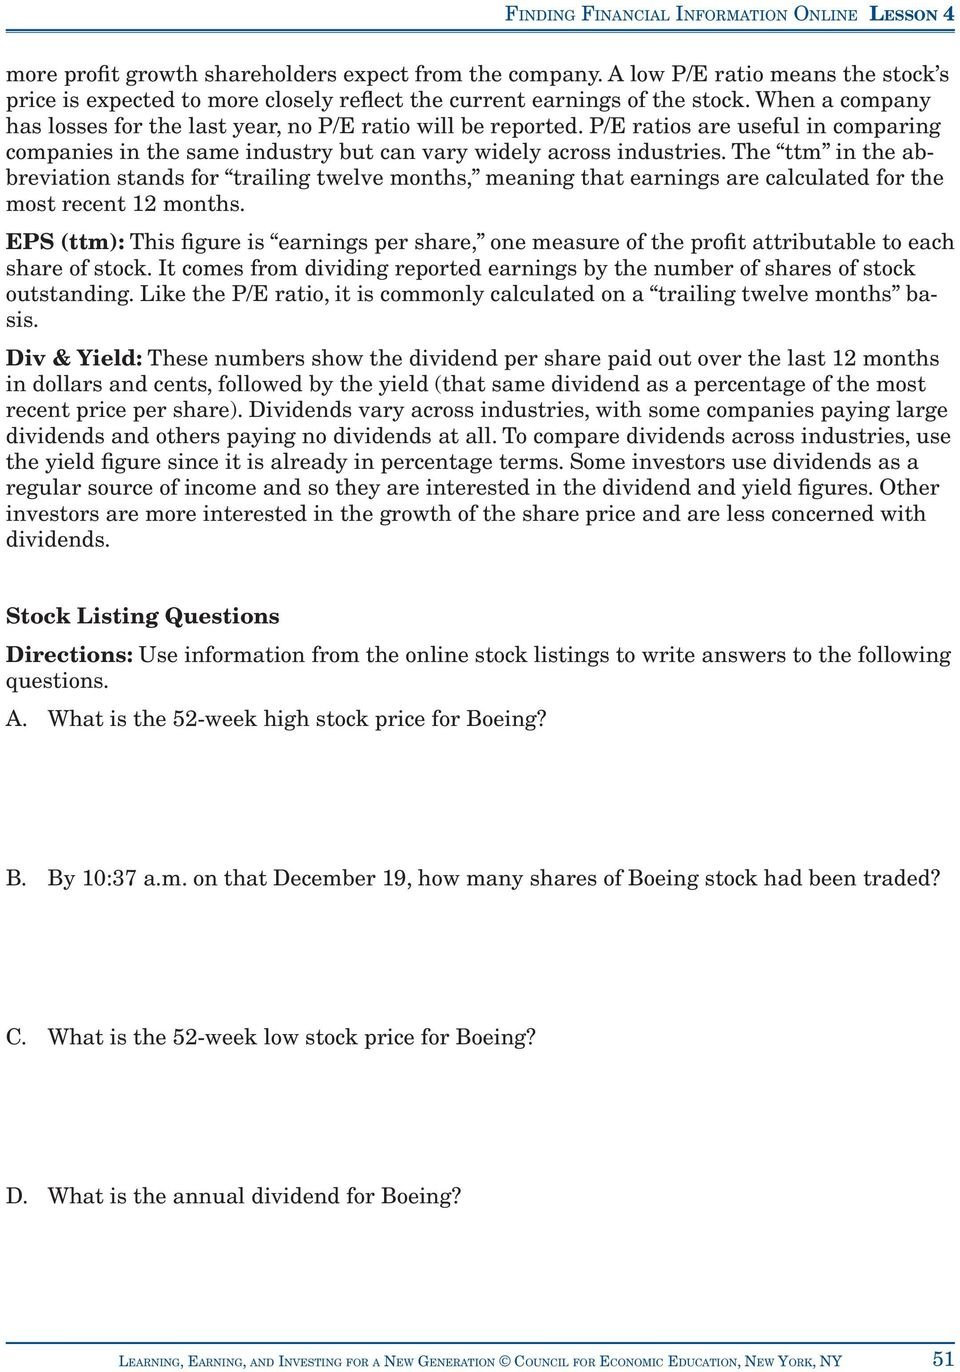 Activity 41 Reading A Stock Table  Pdf Throughout Reading A Stock Table Worksheet Answers